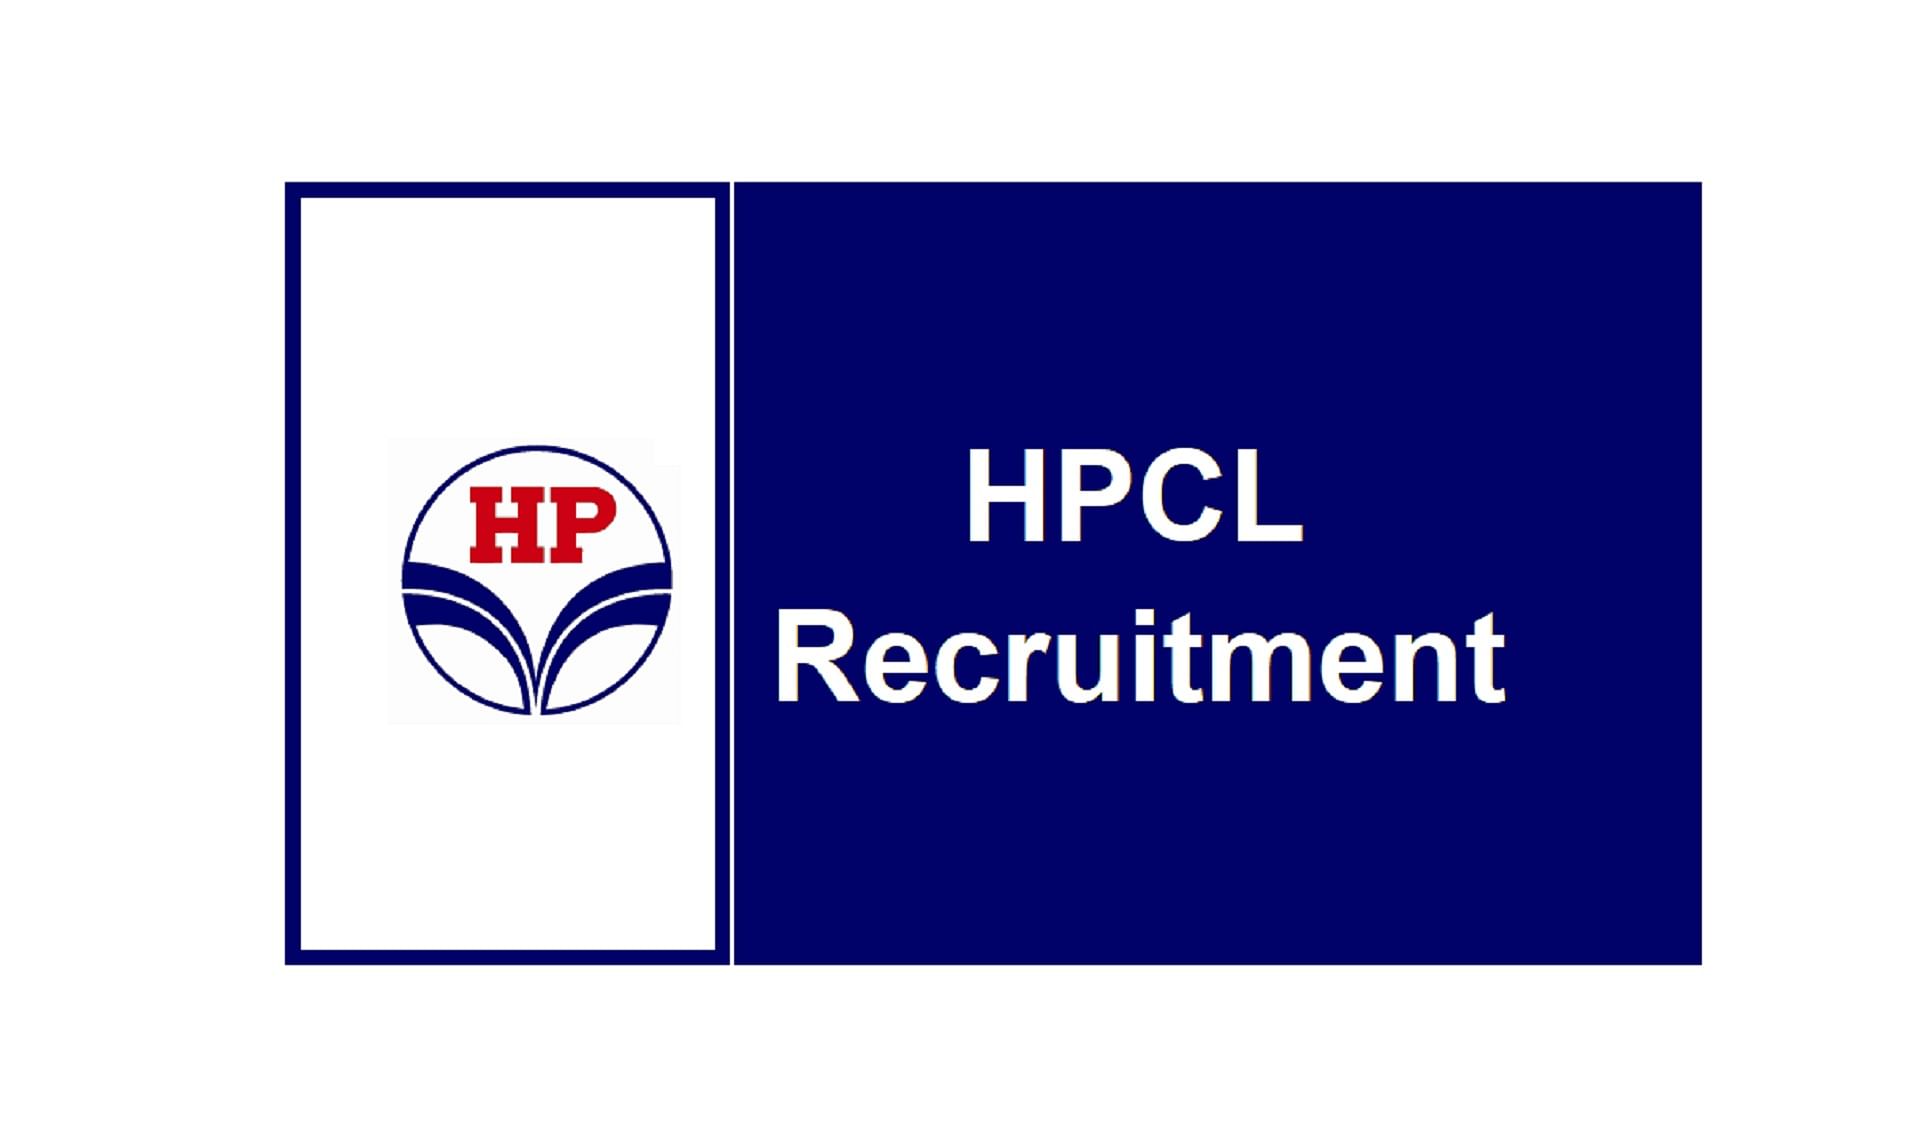 HPCL Recruitment 2022: Vacancy for 100 Graduate Apprentice Trainees, Stipend Offered upto Rs 25000